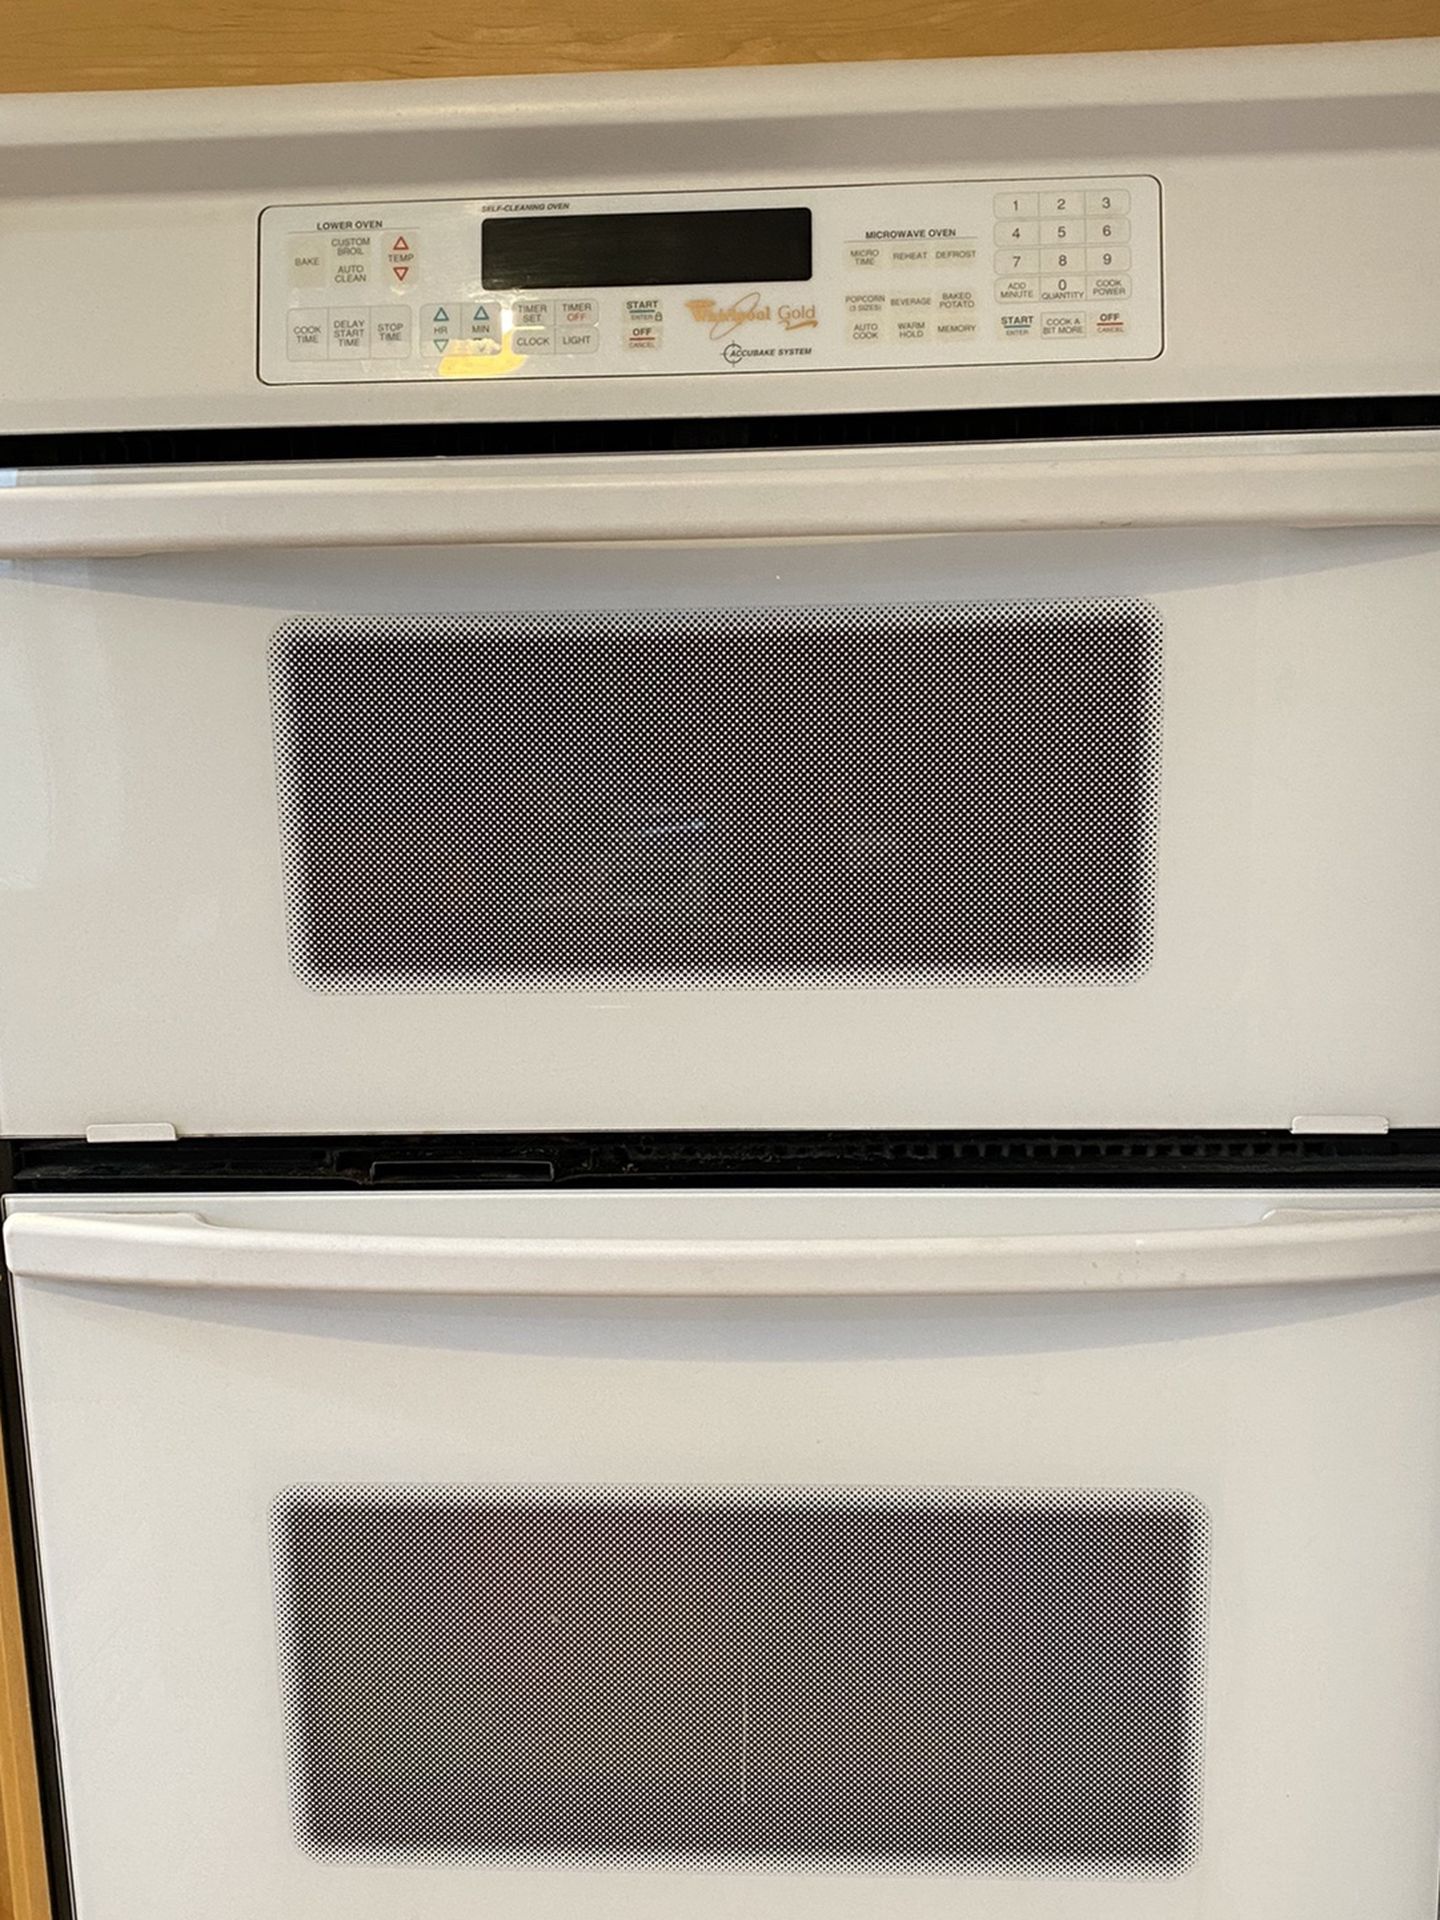 Whirlpool Gold Accubake System ( Oven/Microwave Combo)